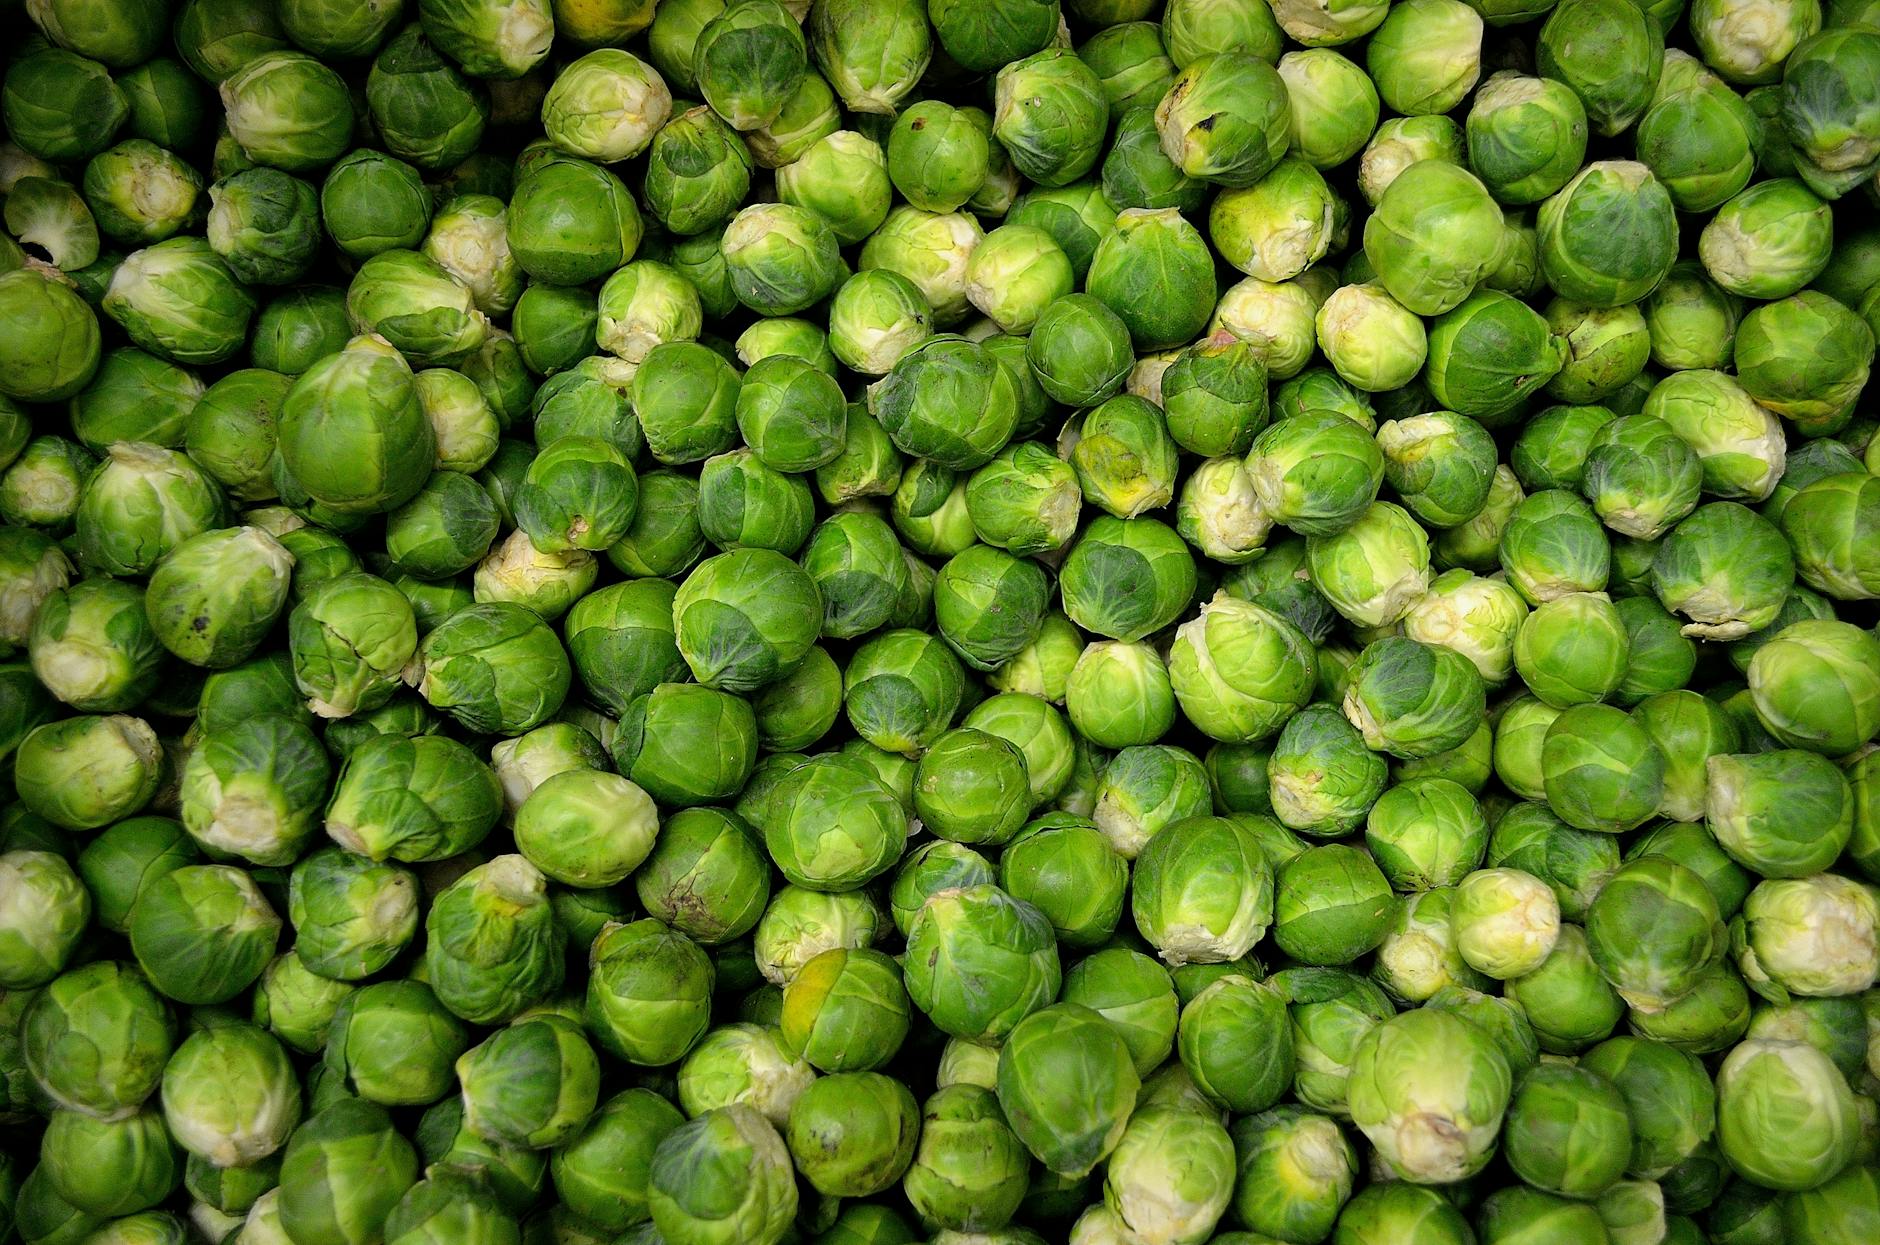 Grow Brussels Sprouts | Winter Vegetables Perfect For Growing In The Cold Season